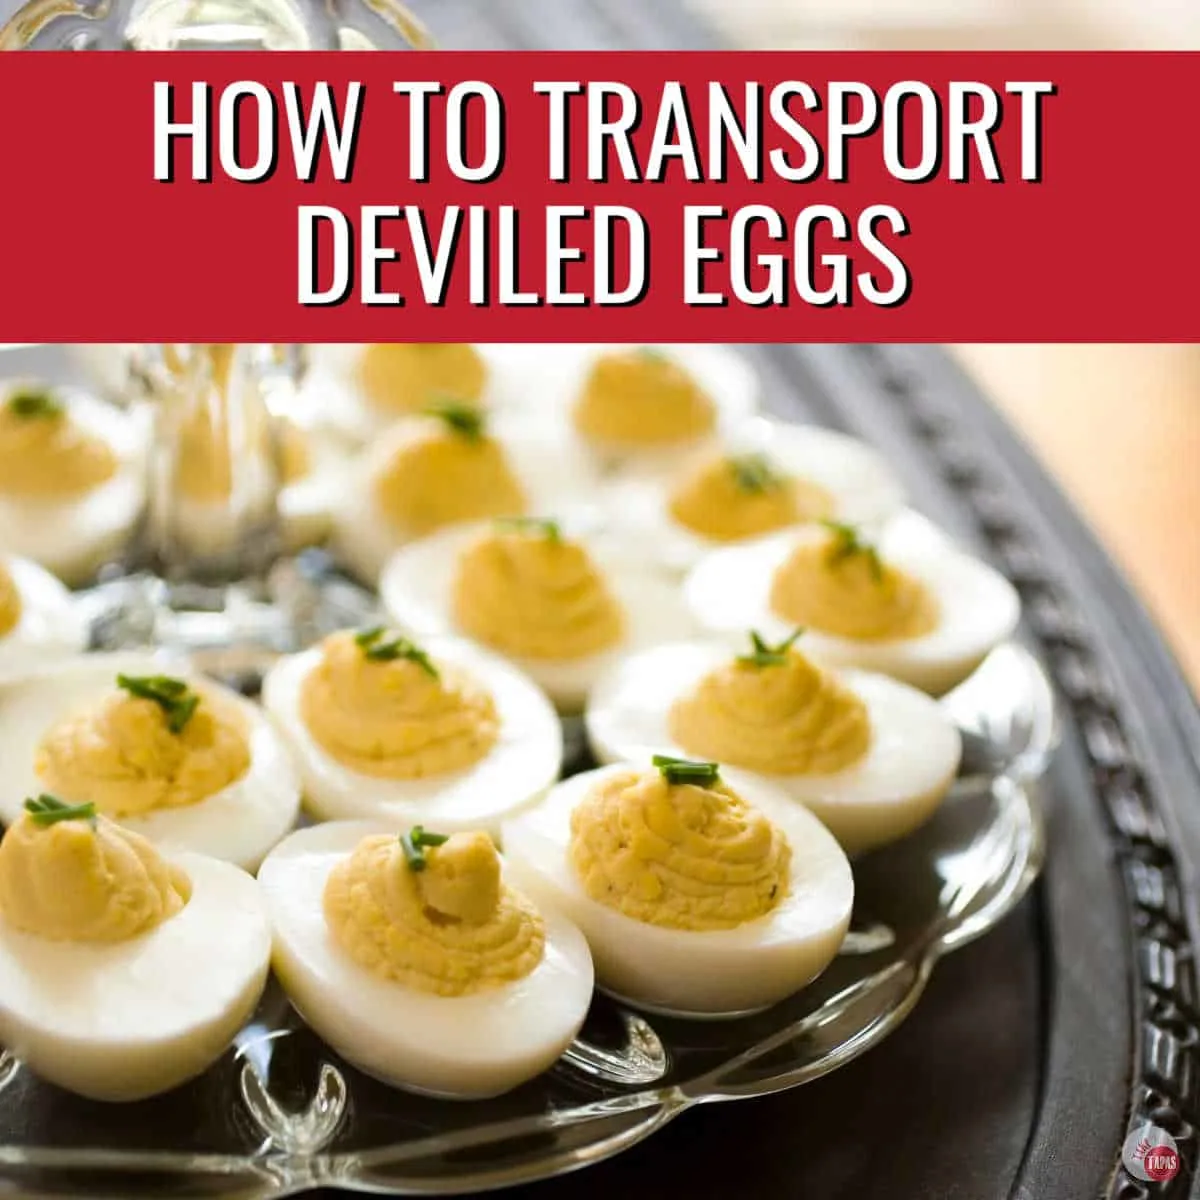 https://www.taketwotapas.com/wp-content/uploads/2022/10/How-to-Transport-Deviled-Eggs-Featured-Image.jpg.webp